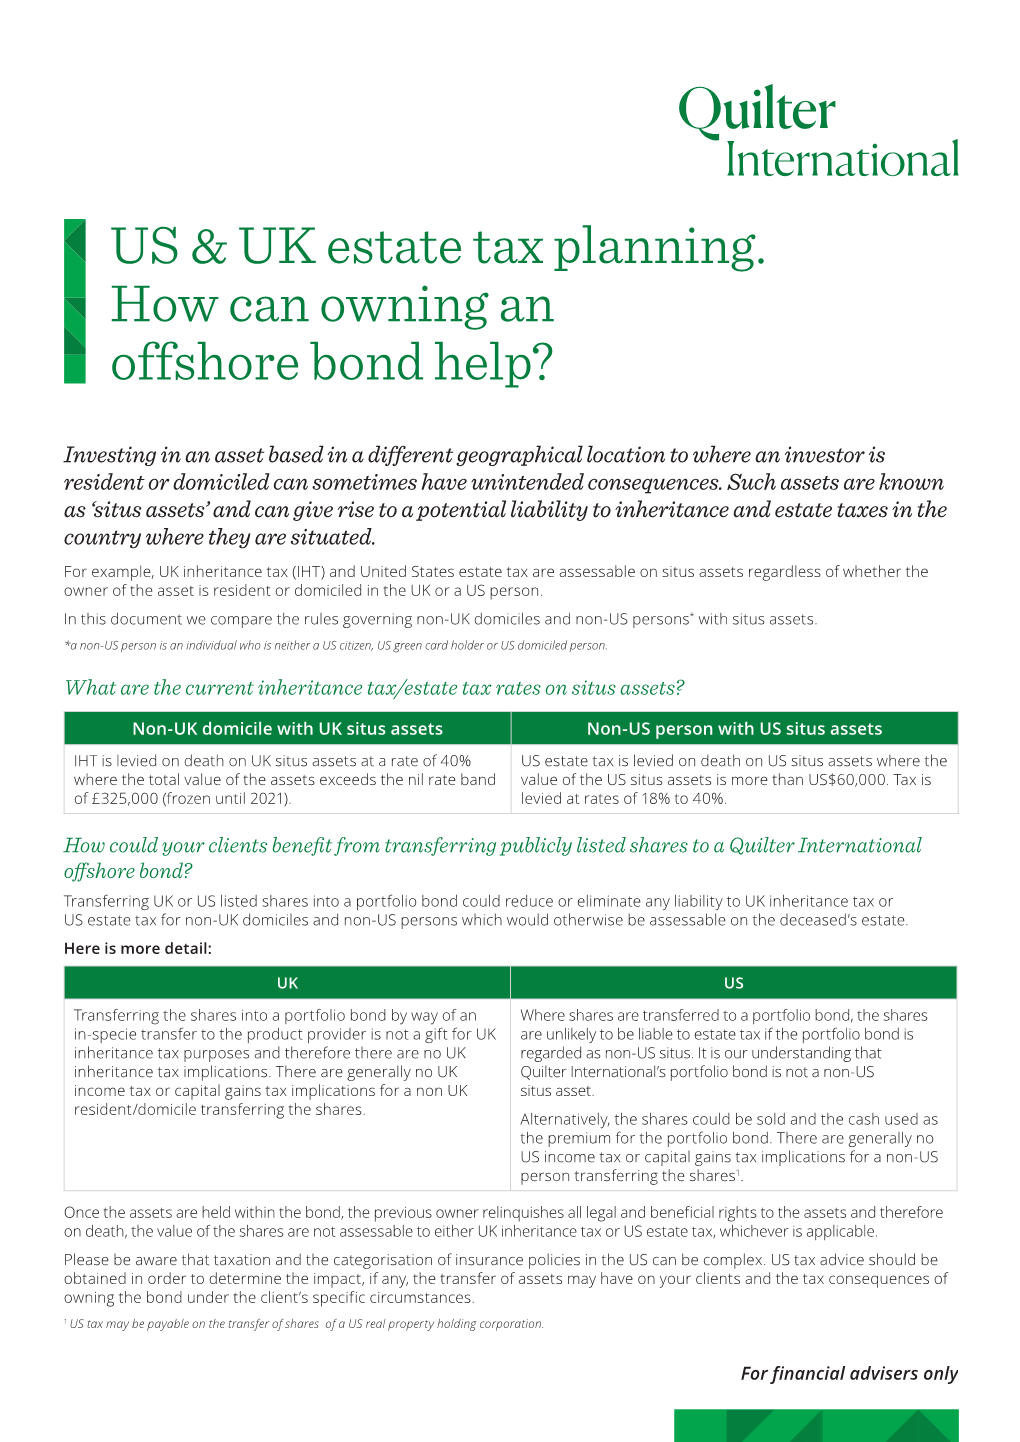 US & UK Estate Tax Planning. How Can Owning an Offshore Bond Help?